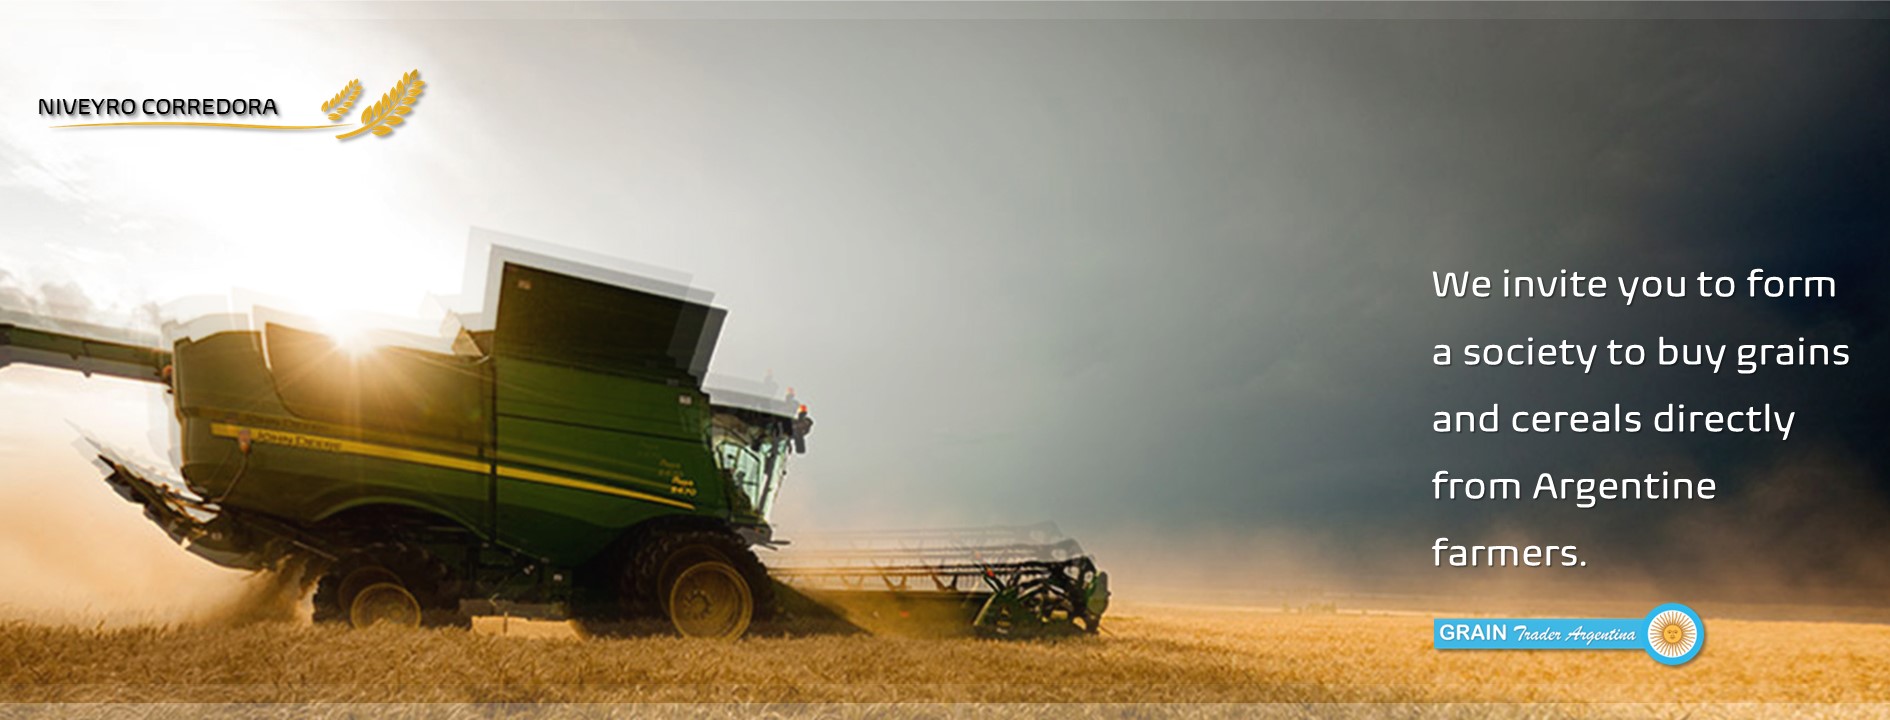 We invite you to form a society to buy grains and cereals directly from Argentine farmers.